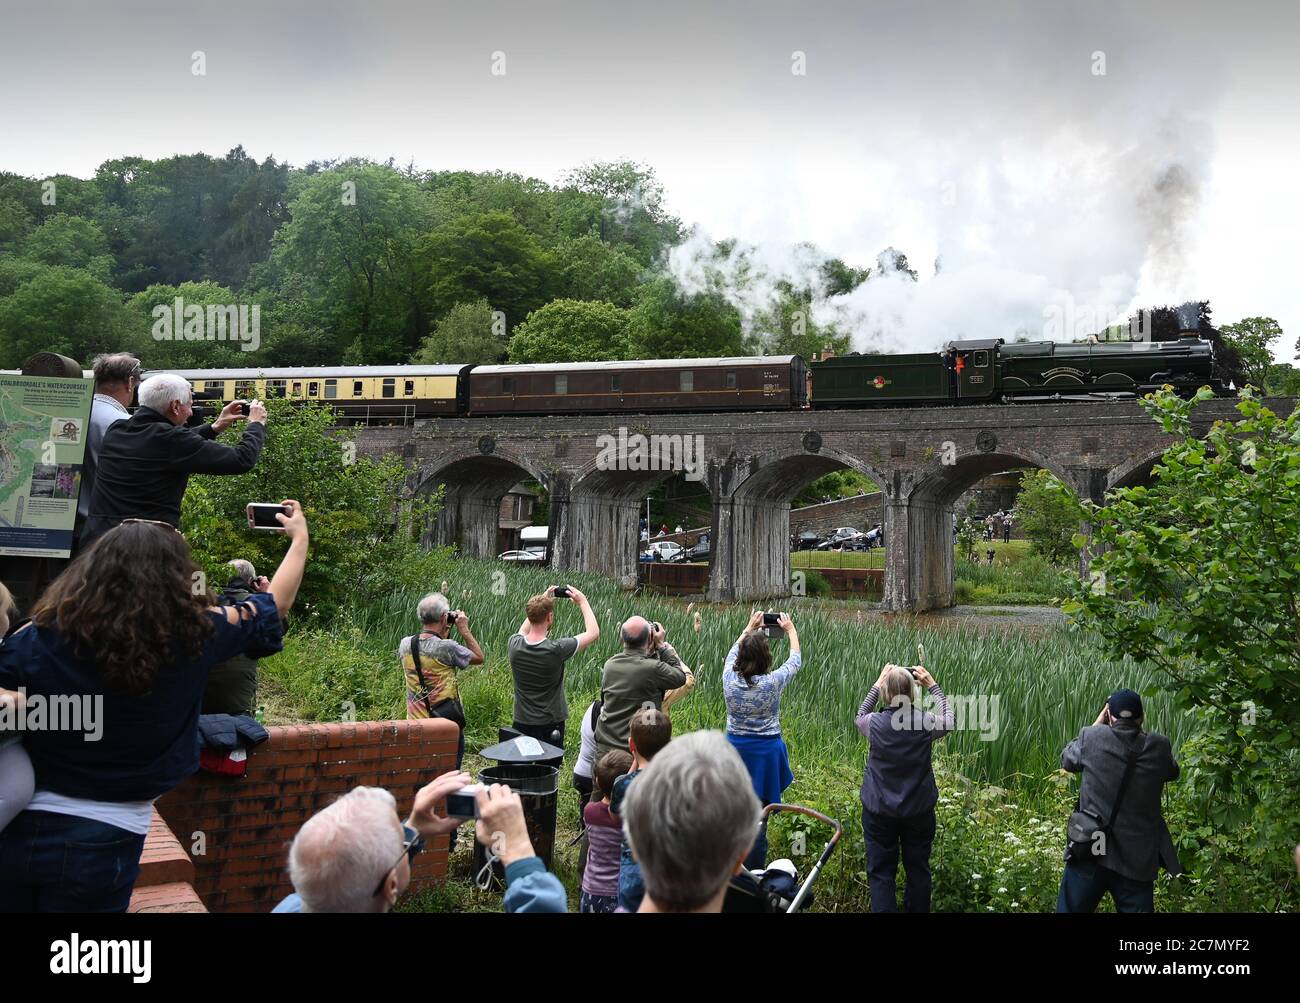 People watching the steam locomotive Clun Castle crossing the Coalbrookdale railway viaduct in Shropshire, England Uk Stock Photo